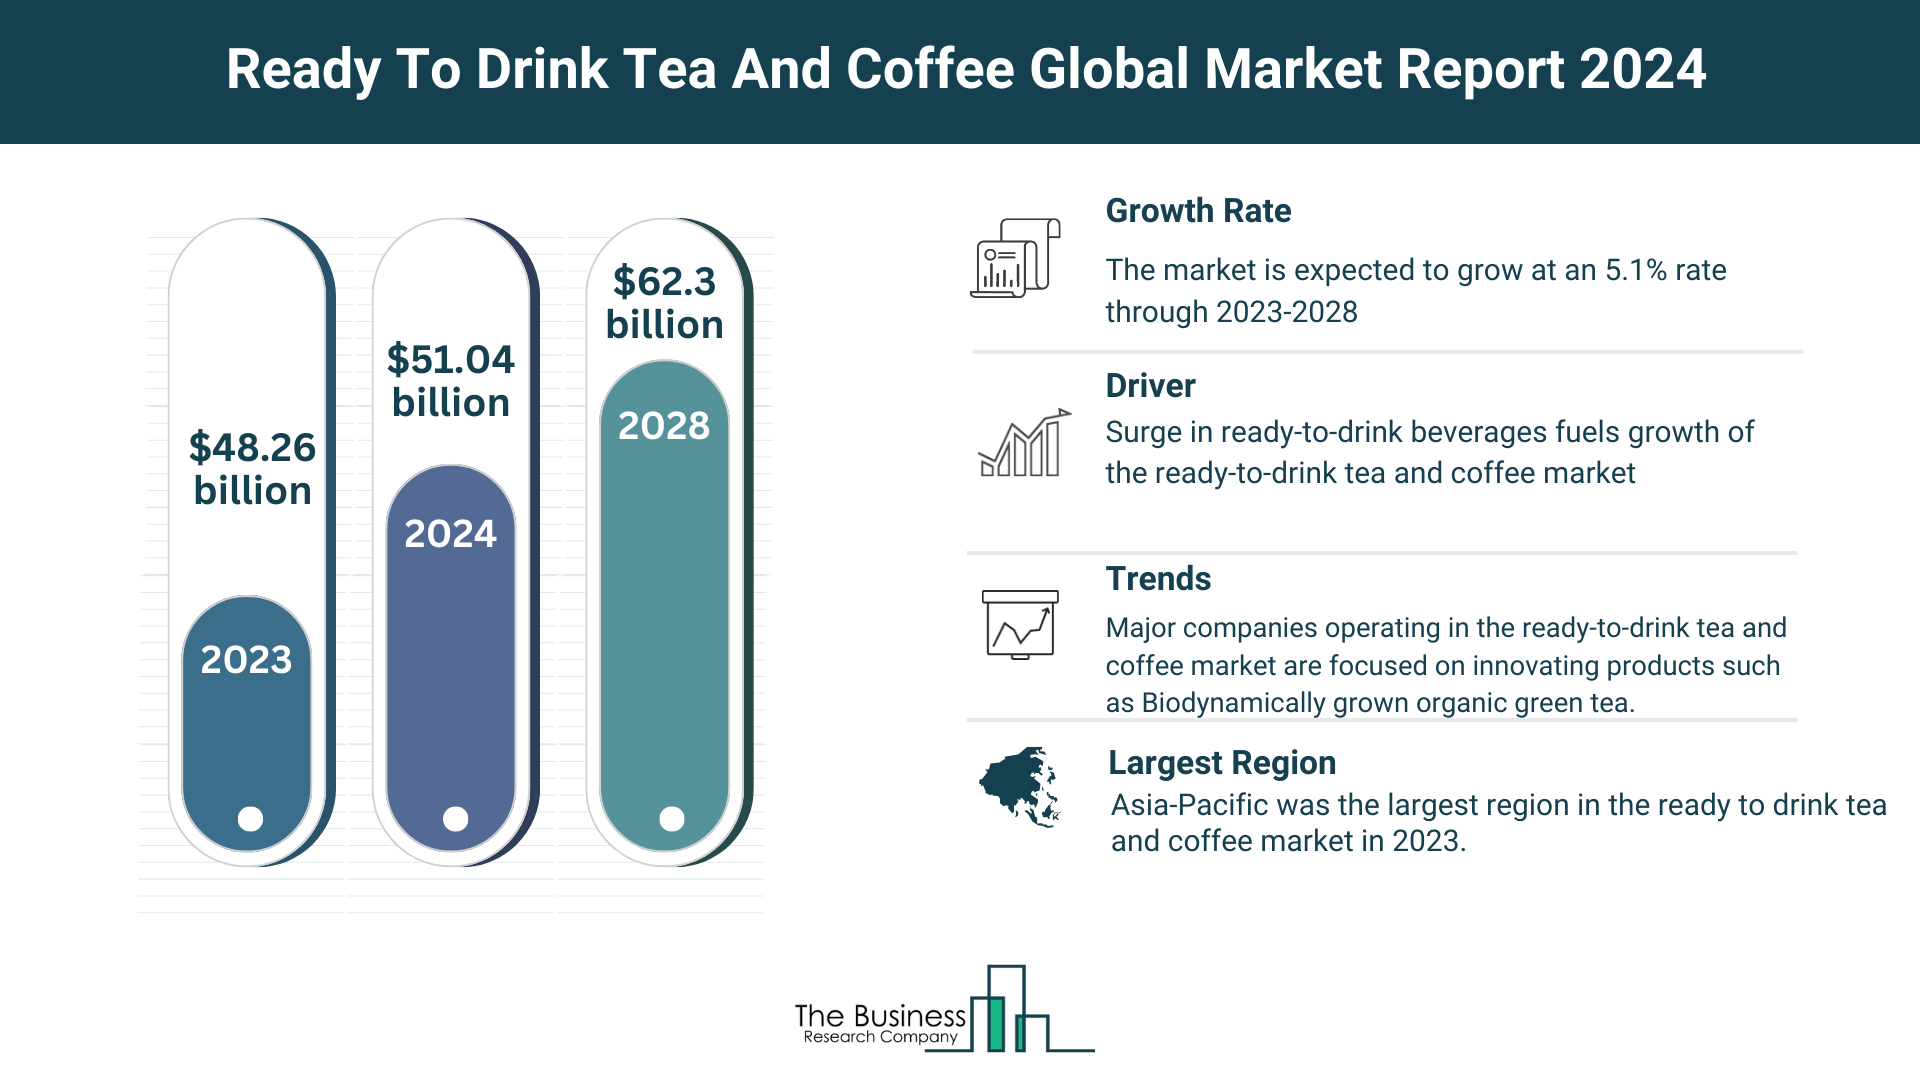 Global Ready To Drink Tea And Coffee Market